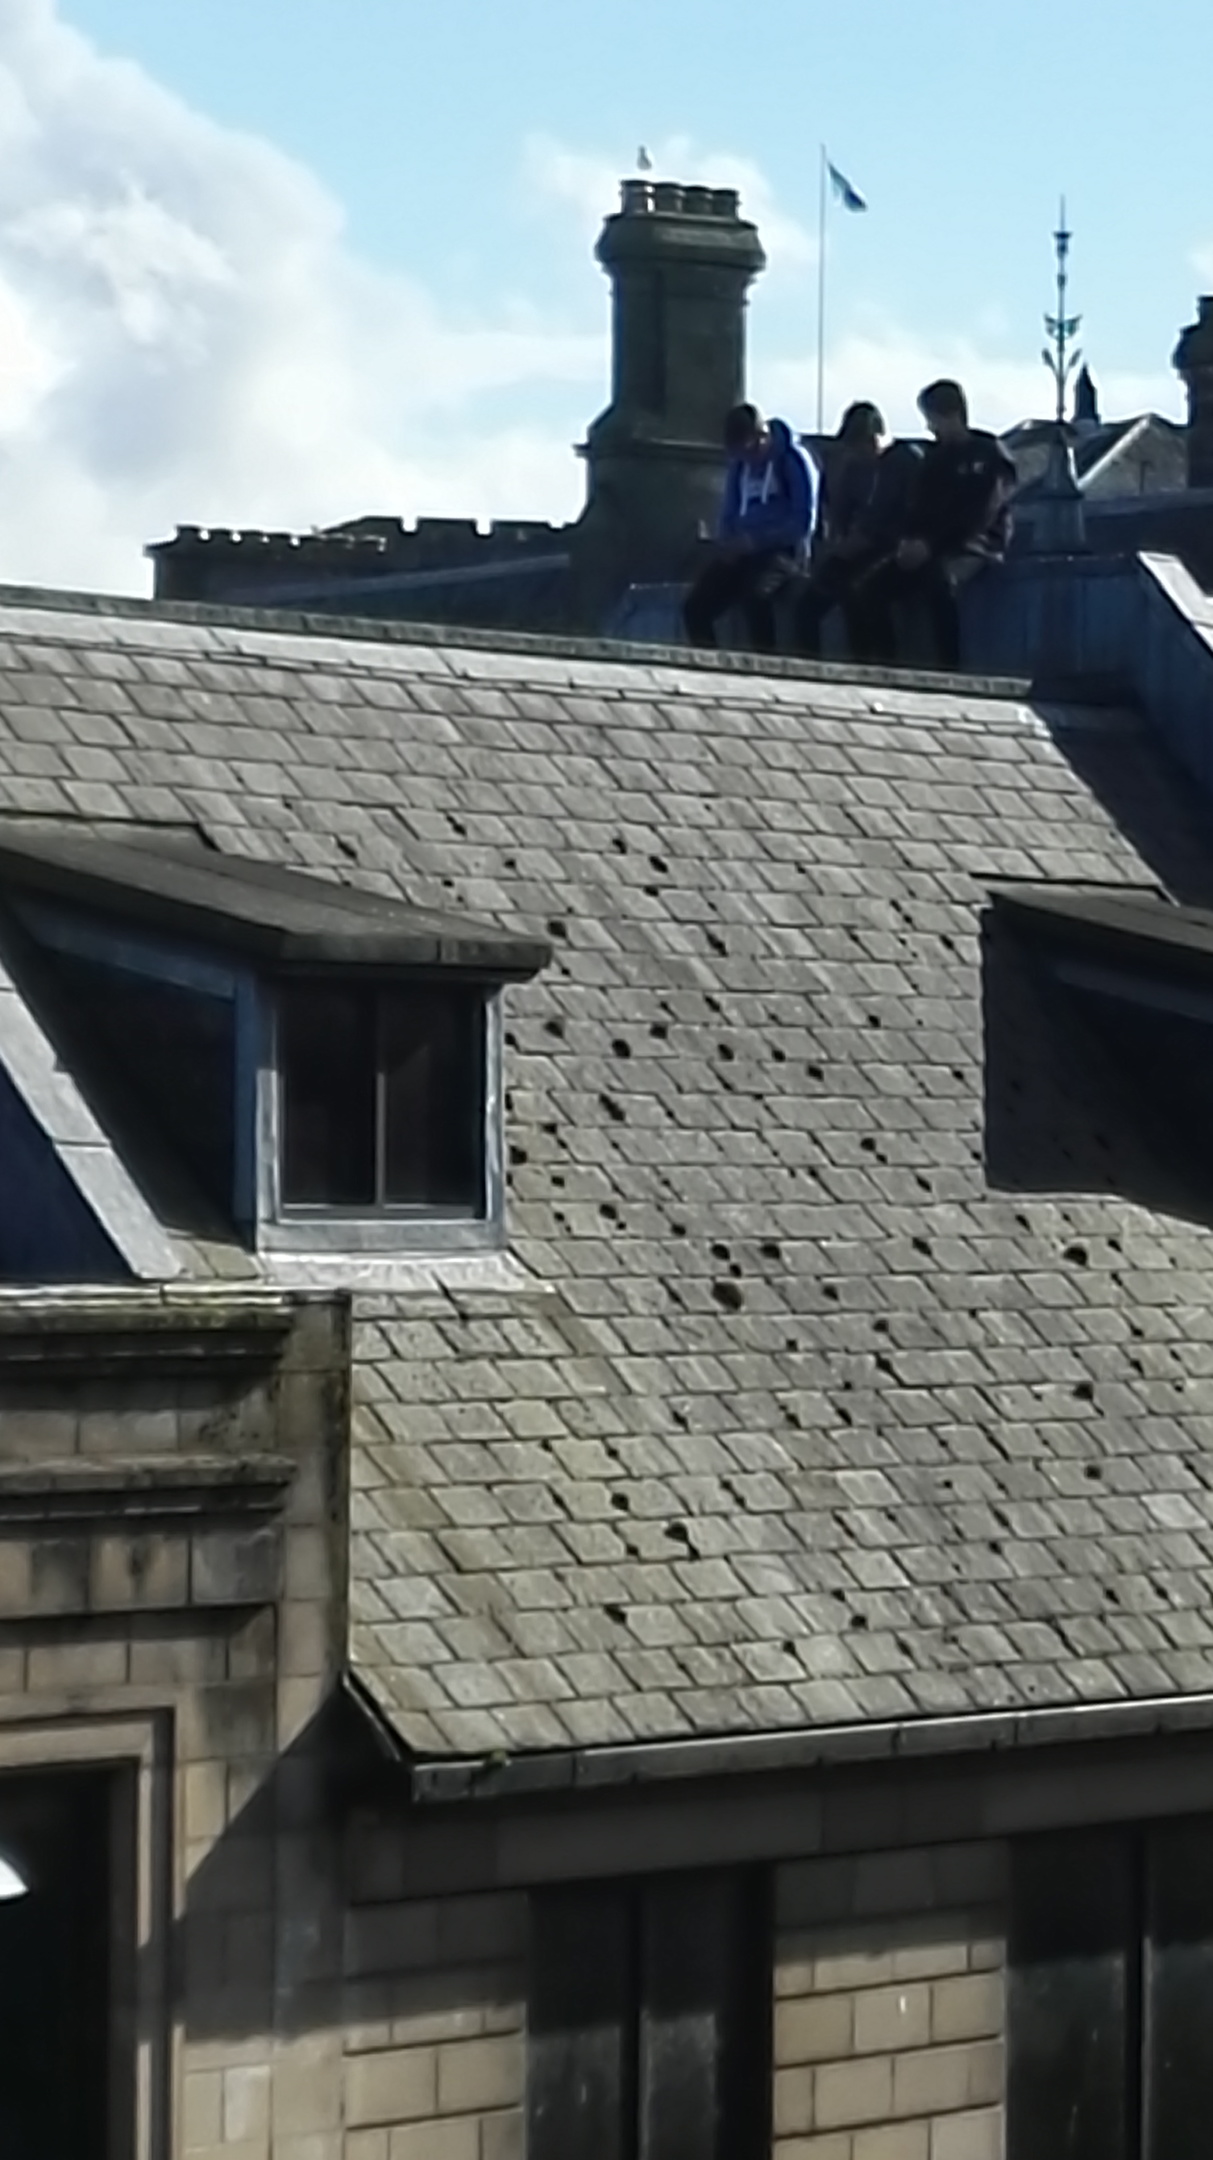 Children playing on rooftops in Inverness city centre